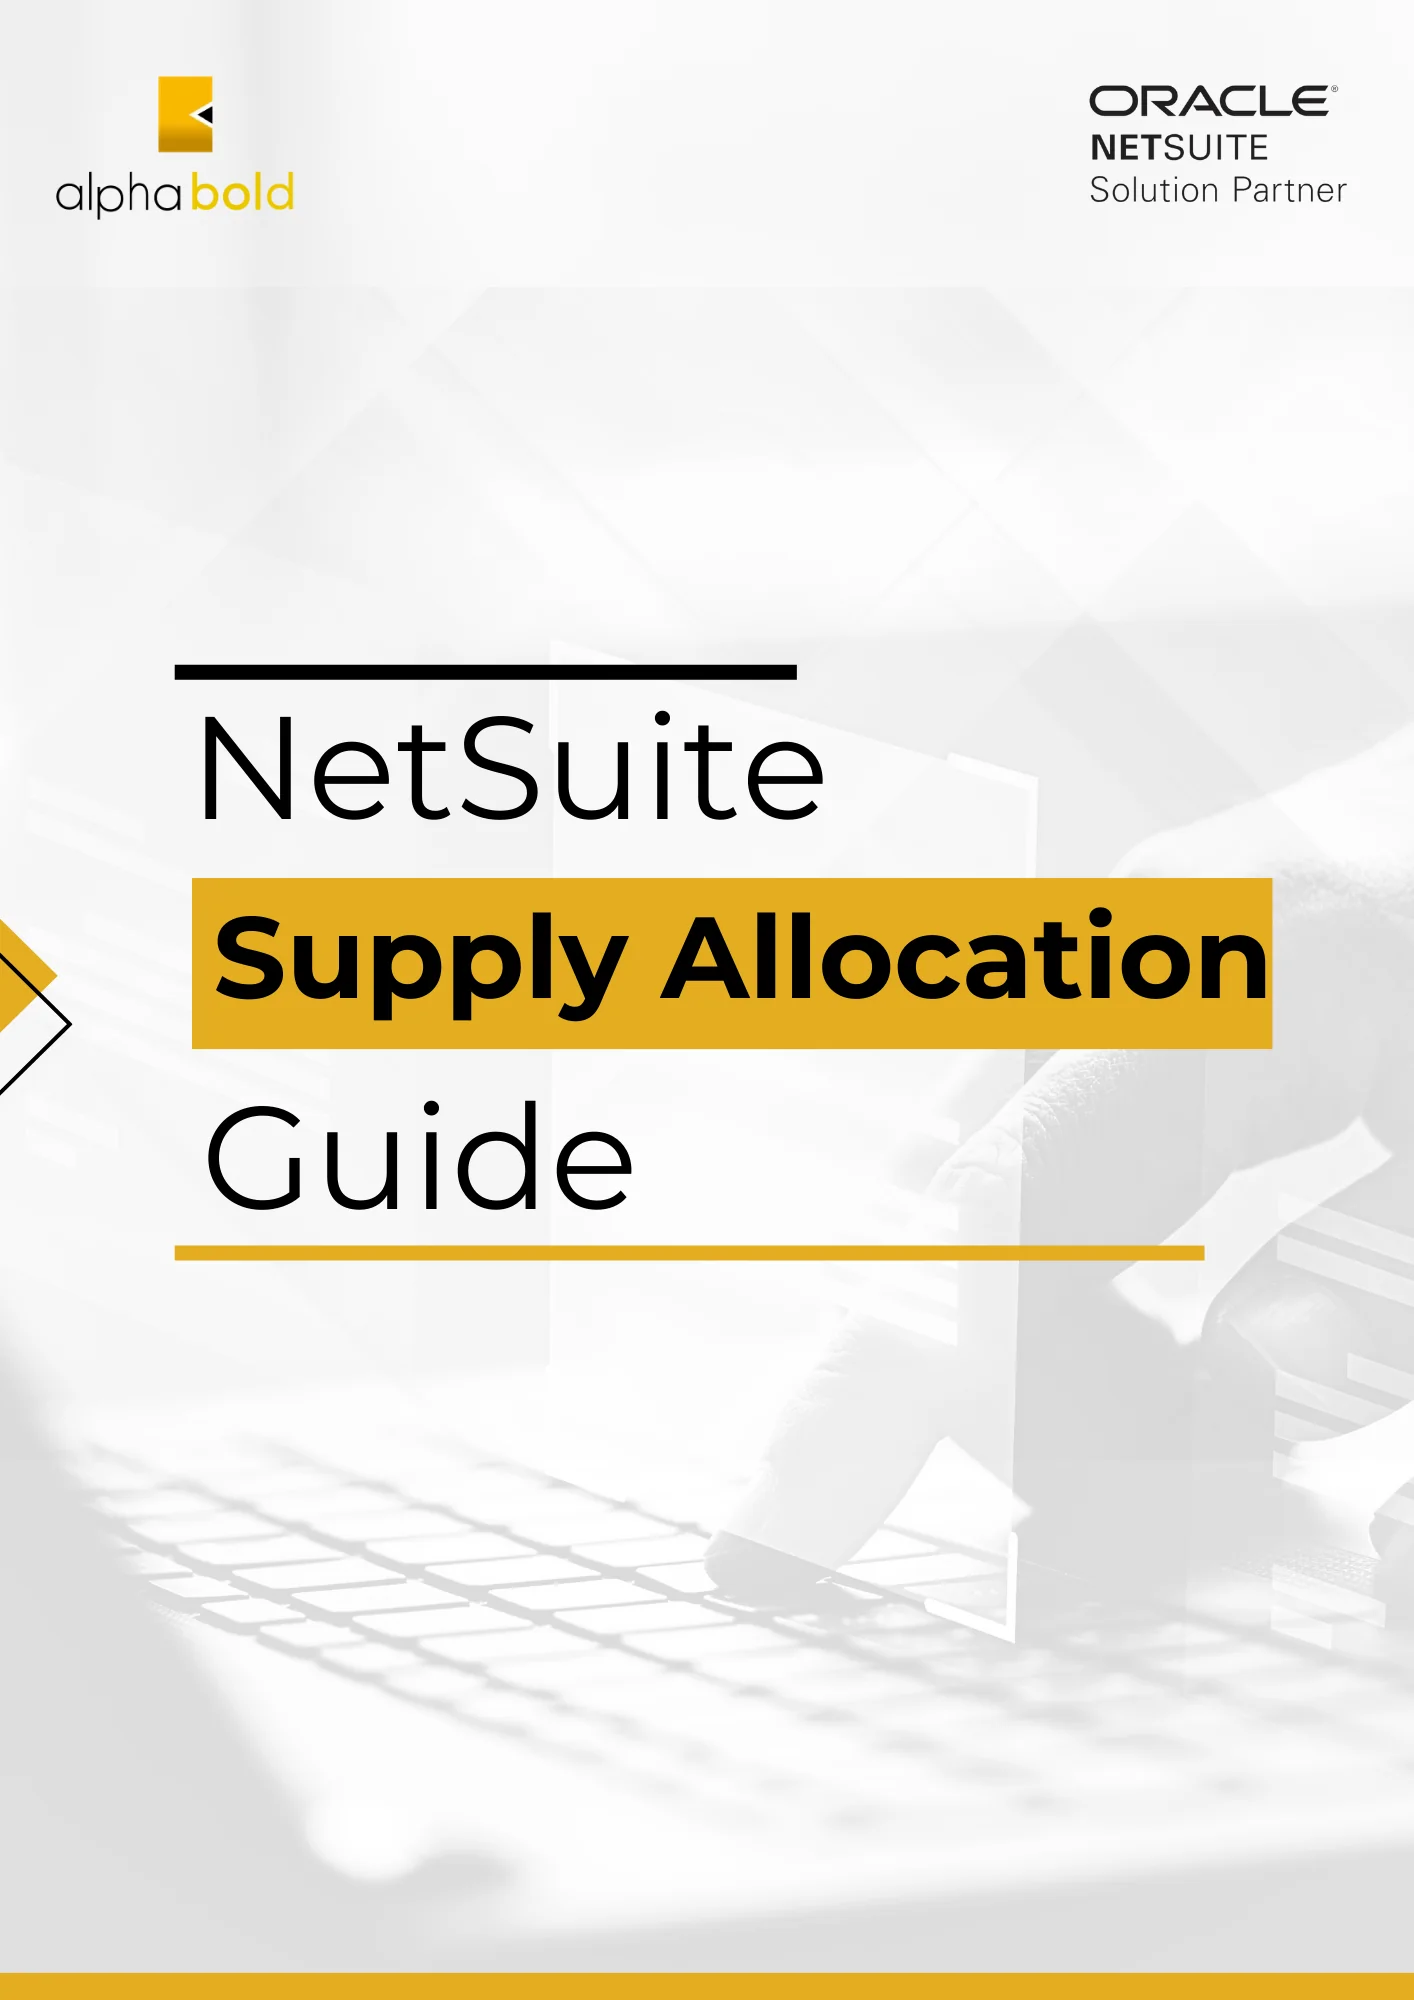 Picture shows NetSuite Supply Allocation Guide